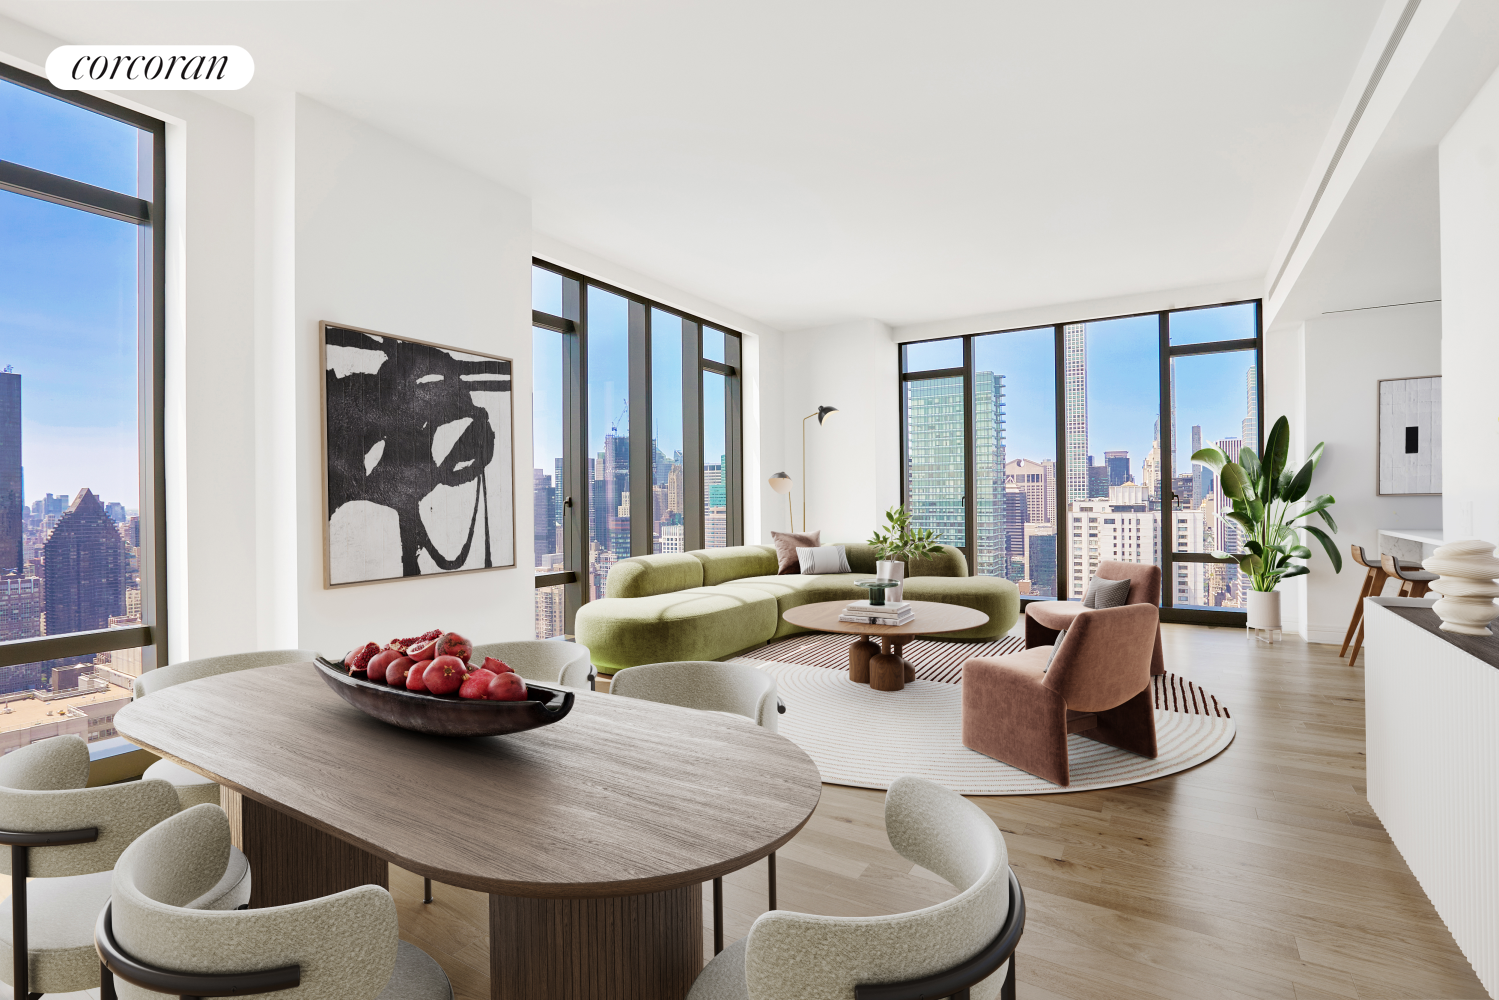 430 East 58th Street 52B, Sutton, Midtown East, NYC - 3 Bedrooms  
3.5 Bathrooms  
5 Rooms - 